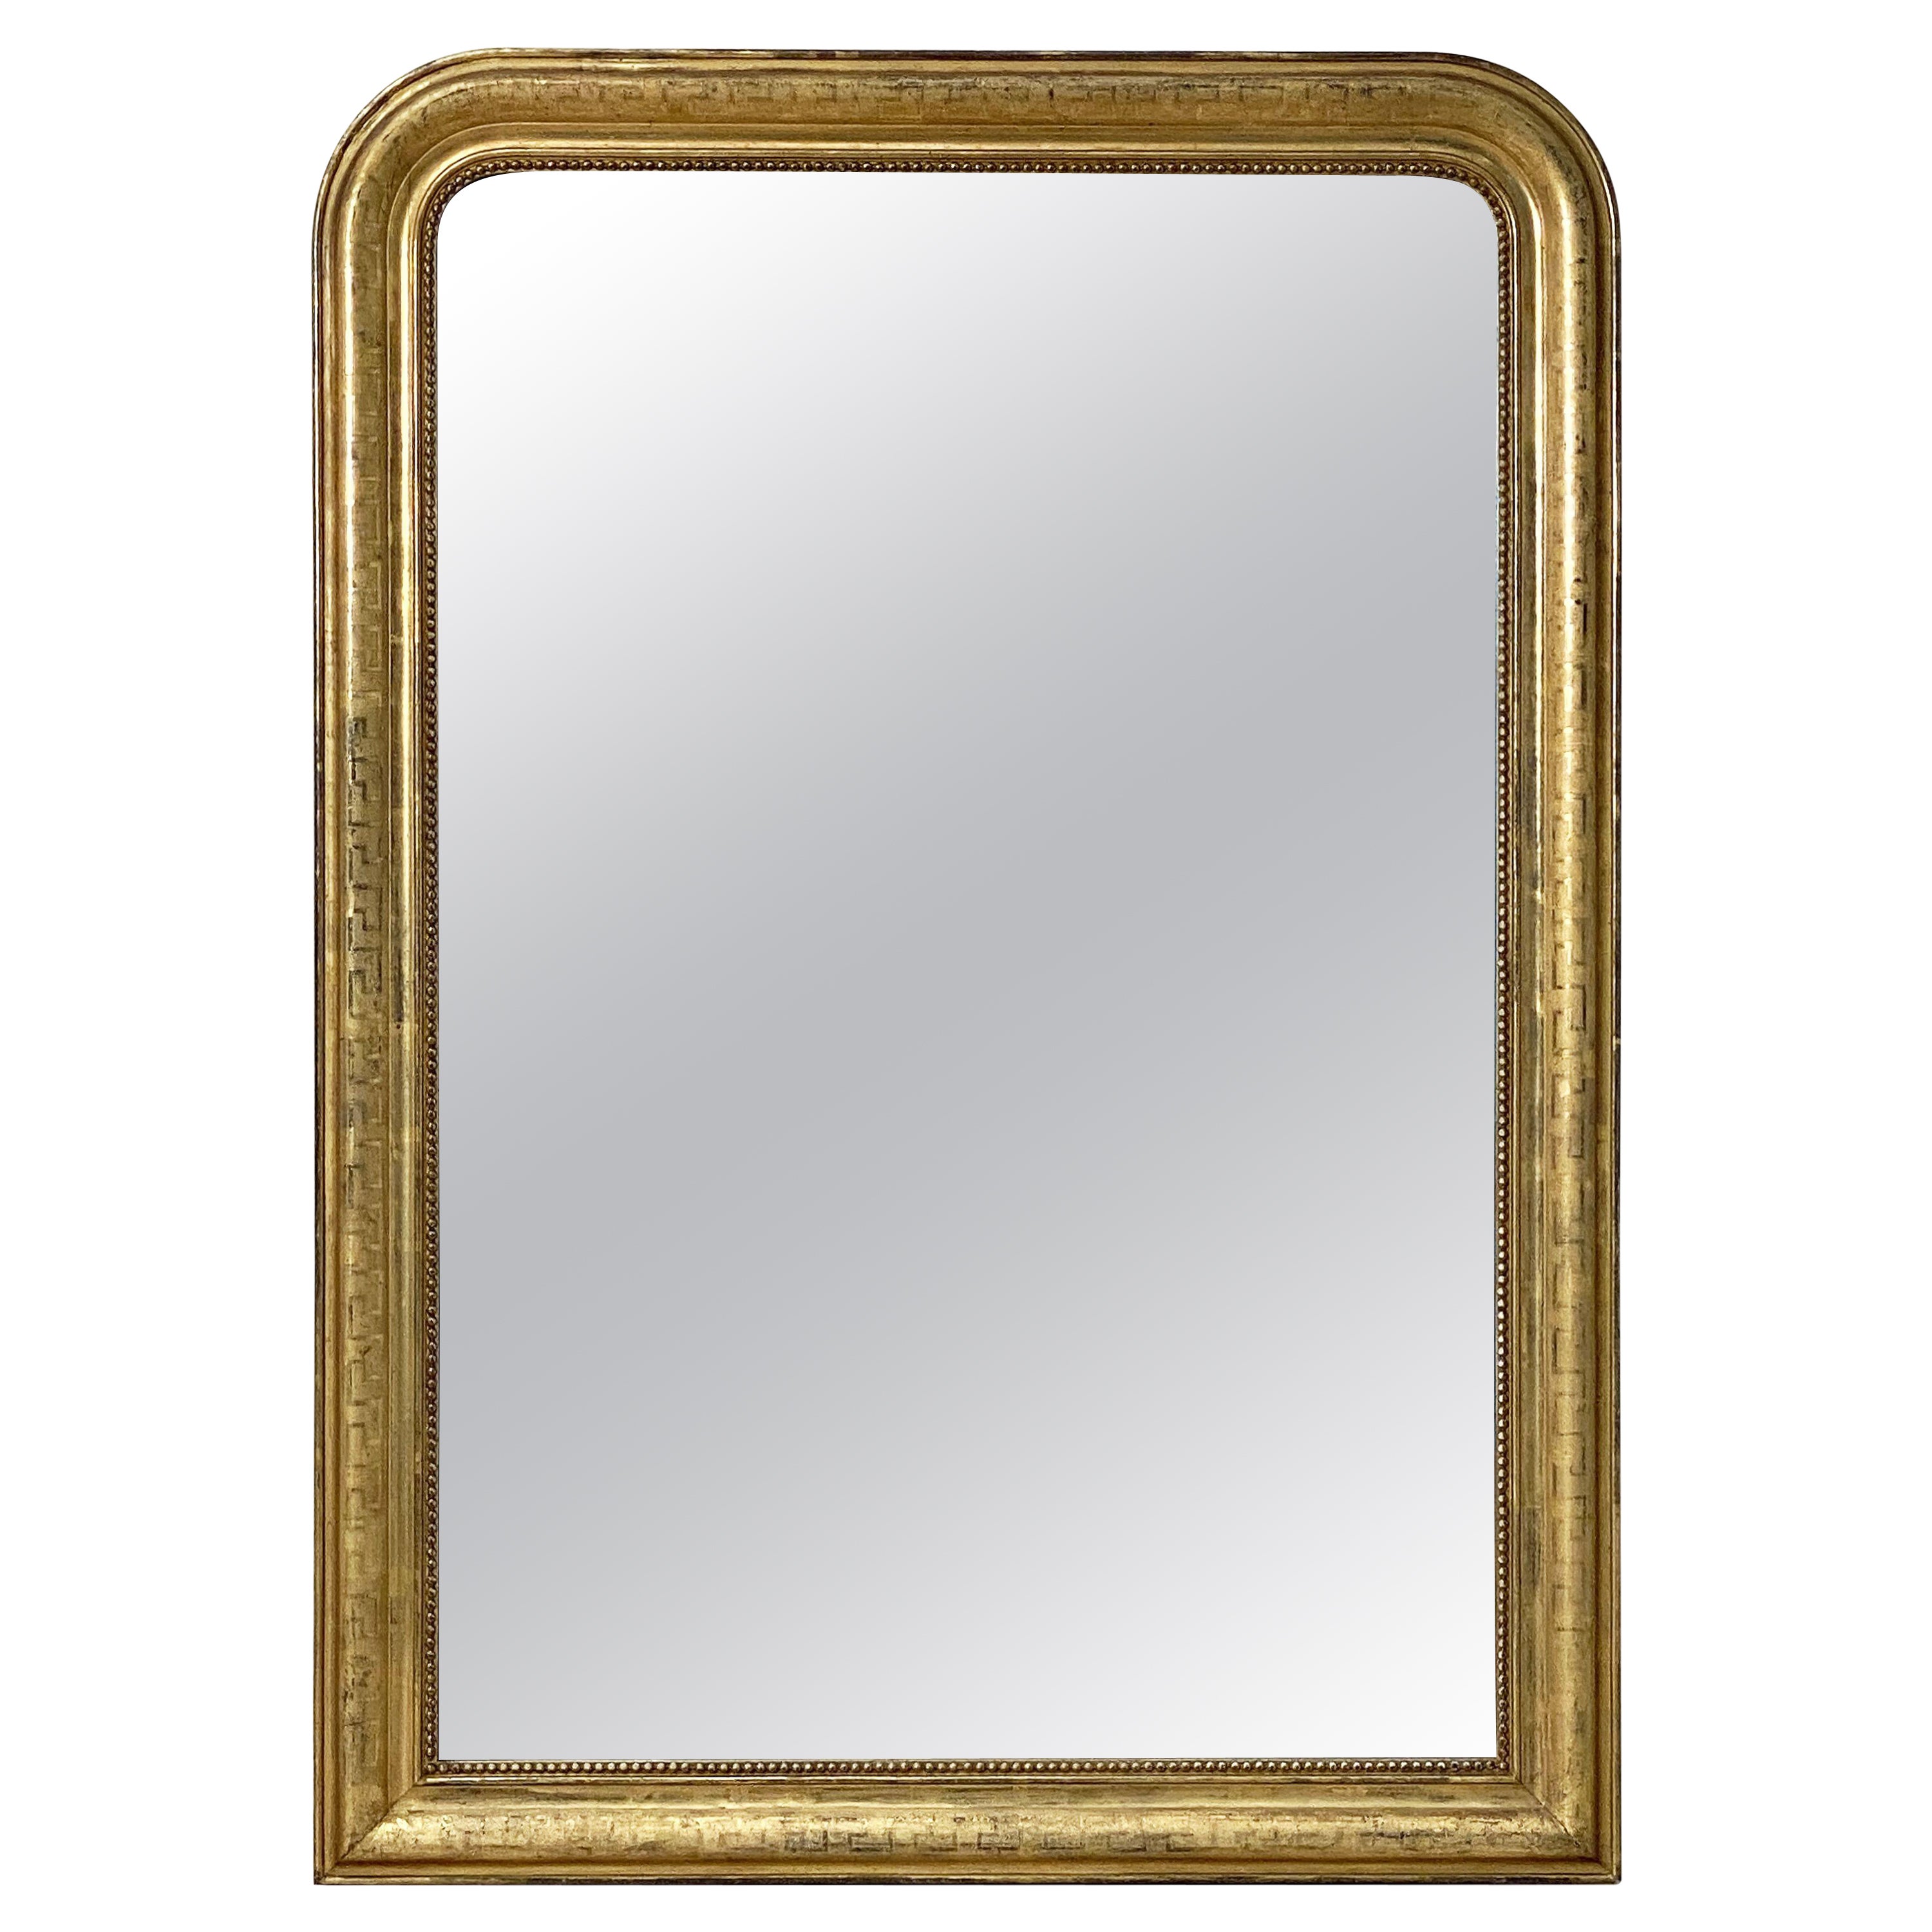 Large Louis Philippe Gilt Mirror with Arch Top from France (H 54 x W 38 1/2)